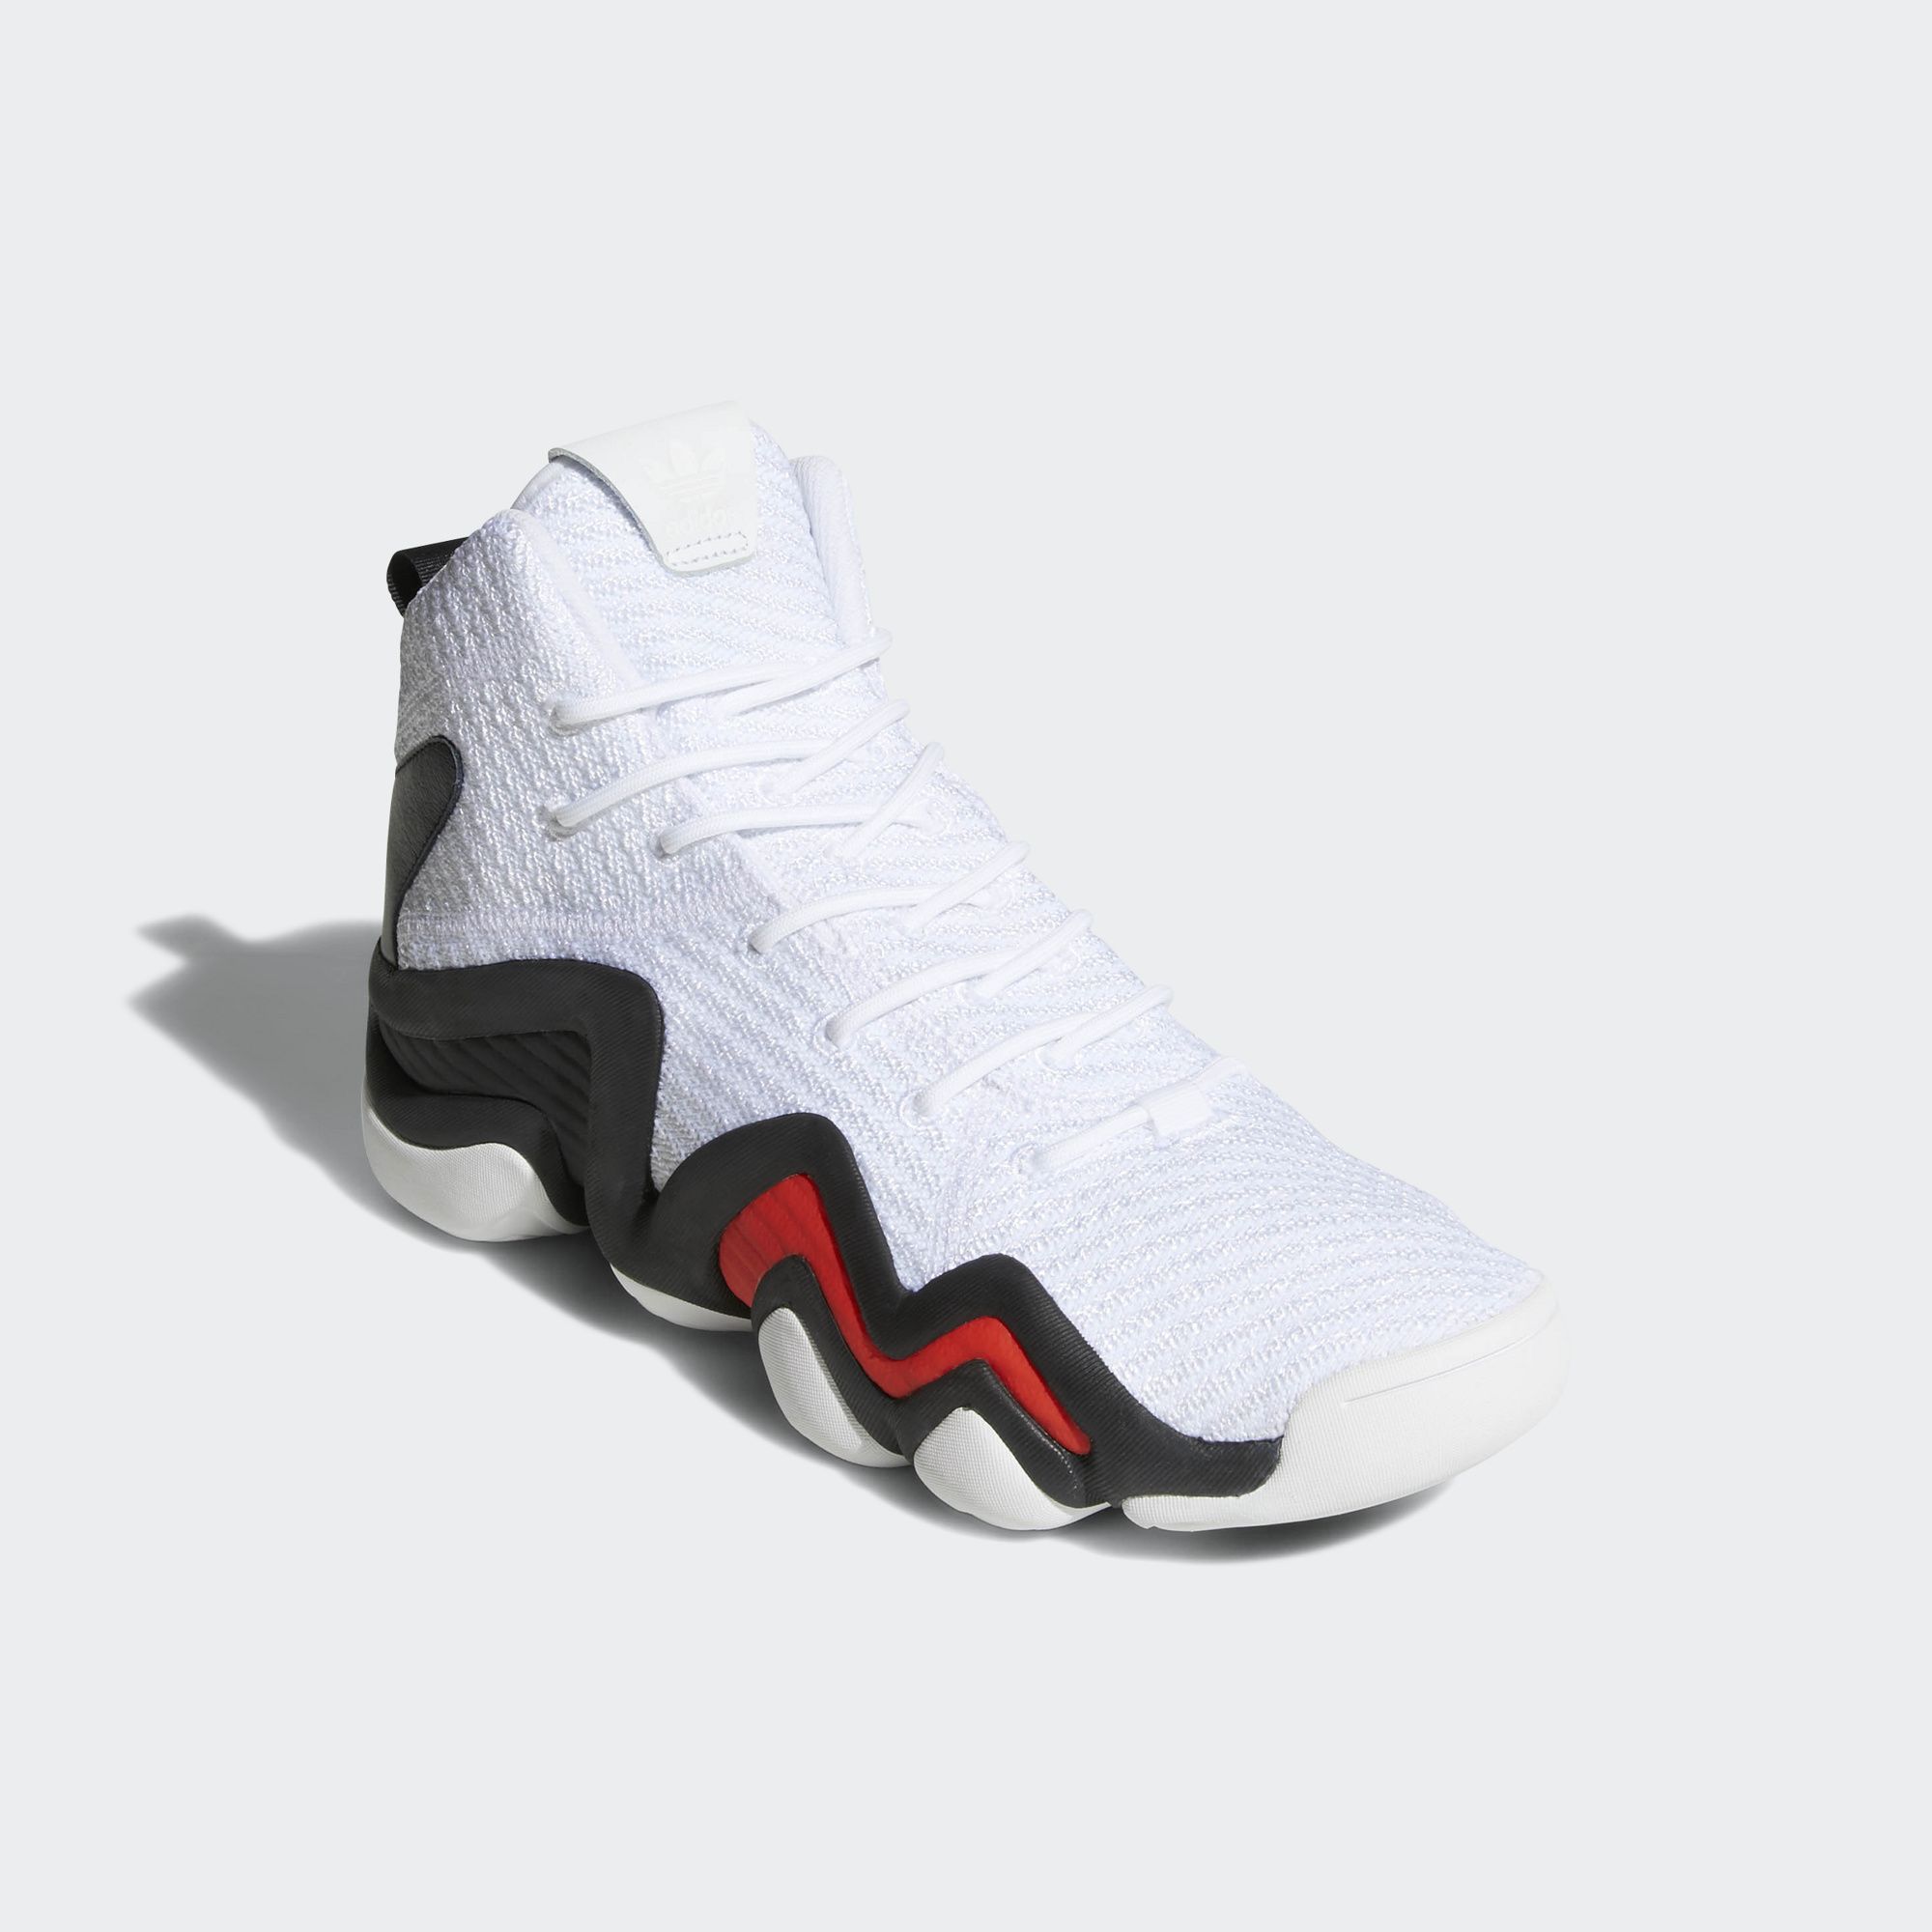 The adidas Crazy 8 ADV PK Surfaces in 